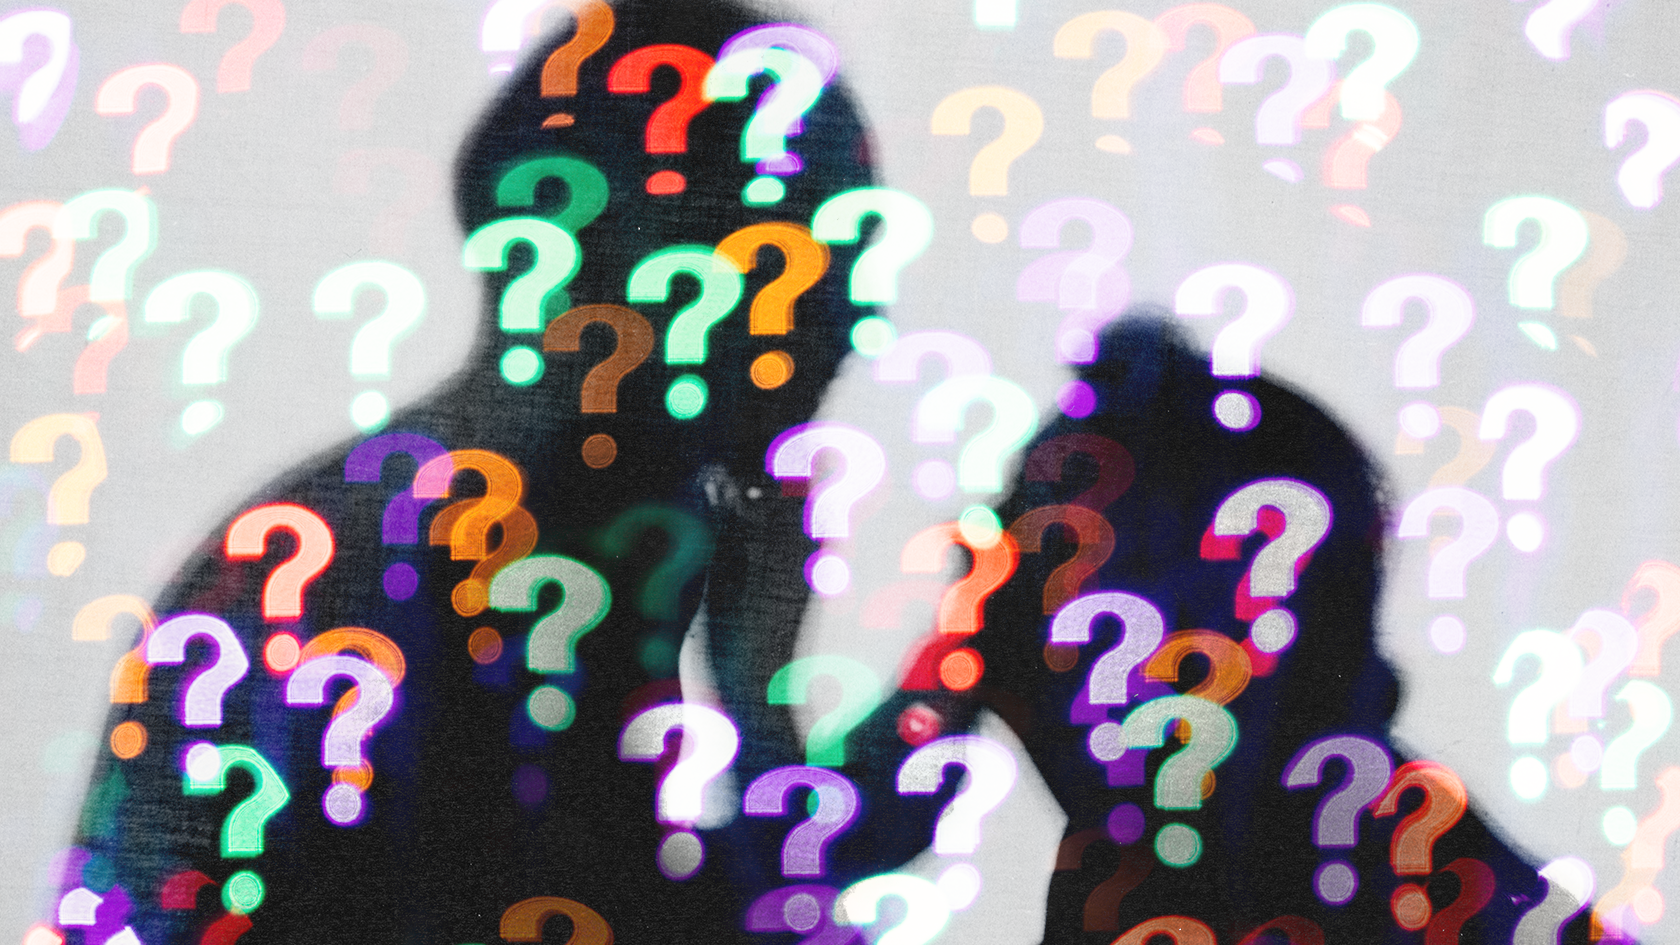 The 55 Most Thought-Provoking Questions to Make You Think